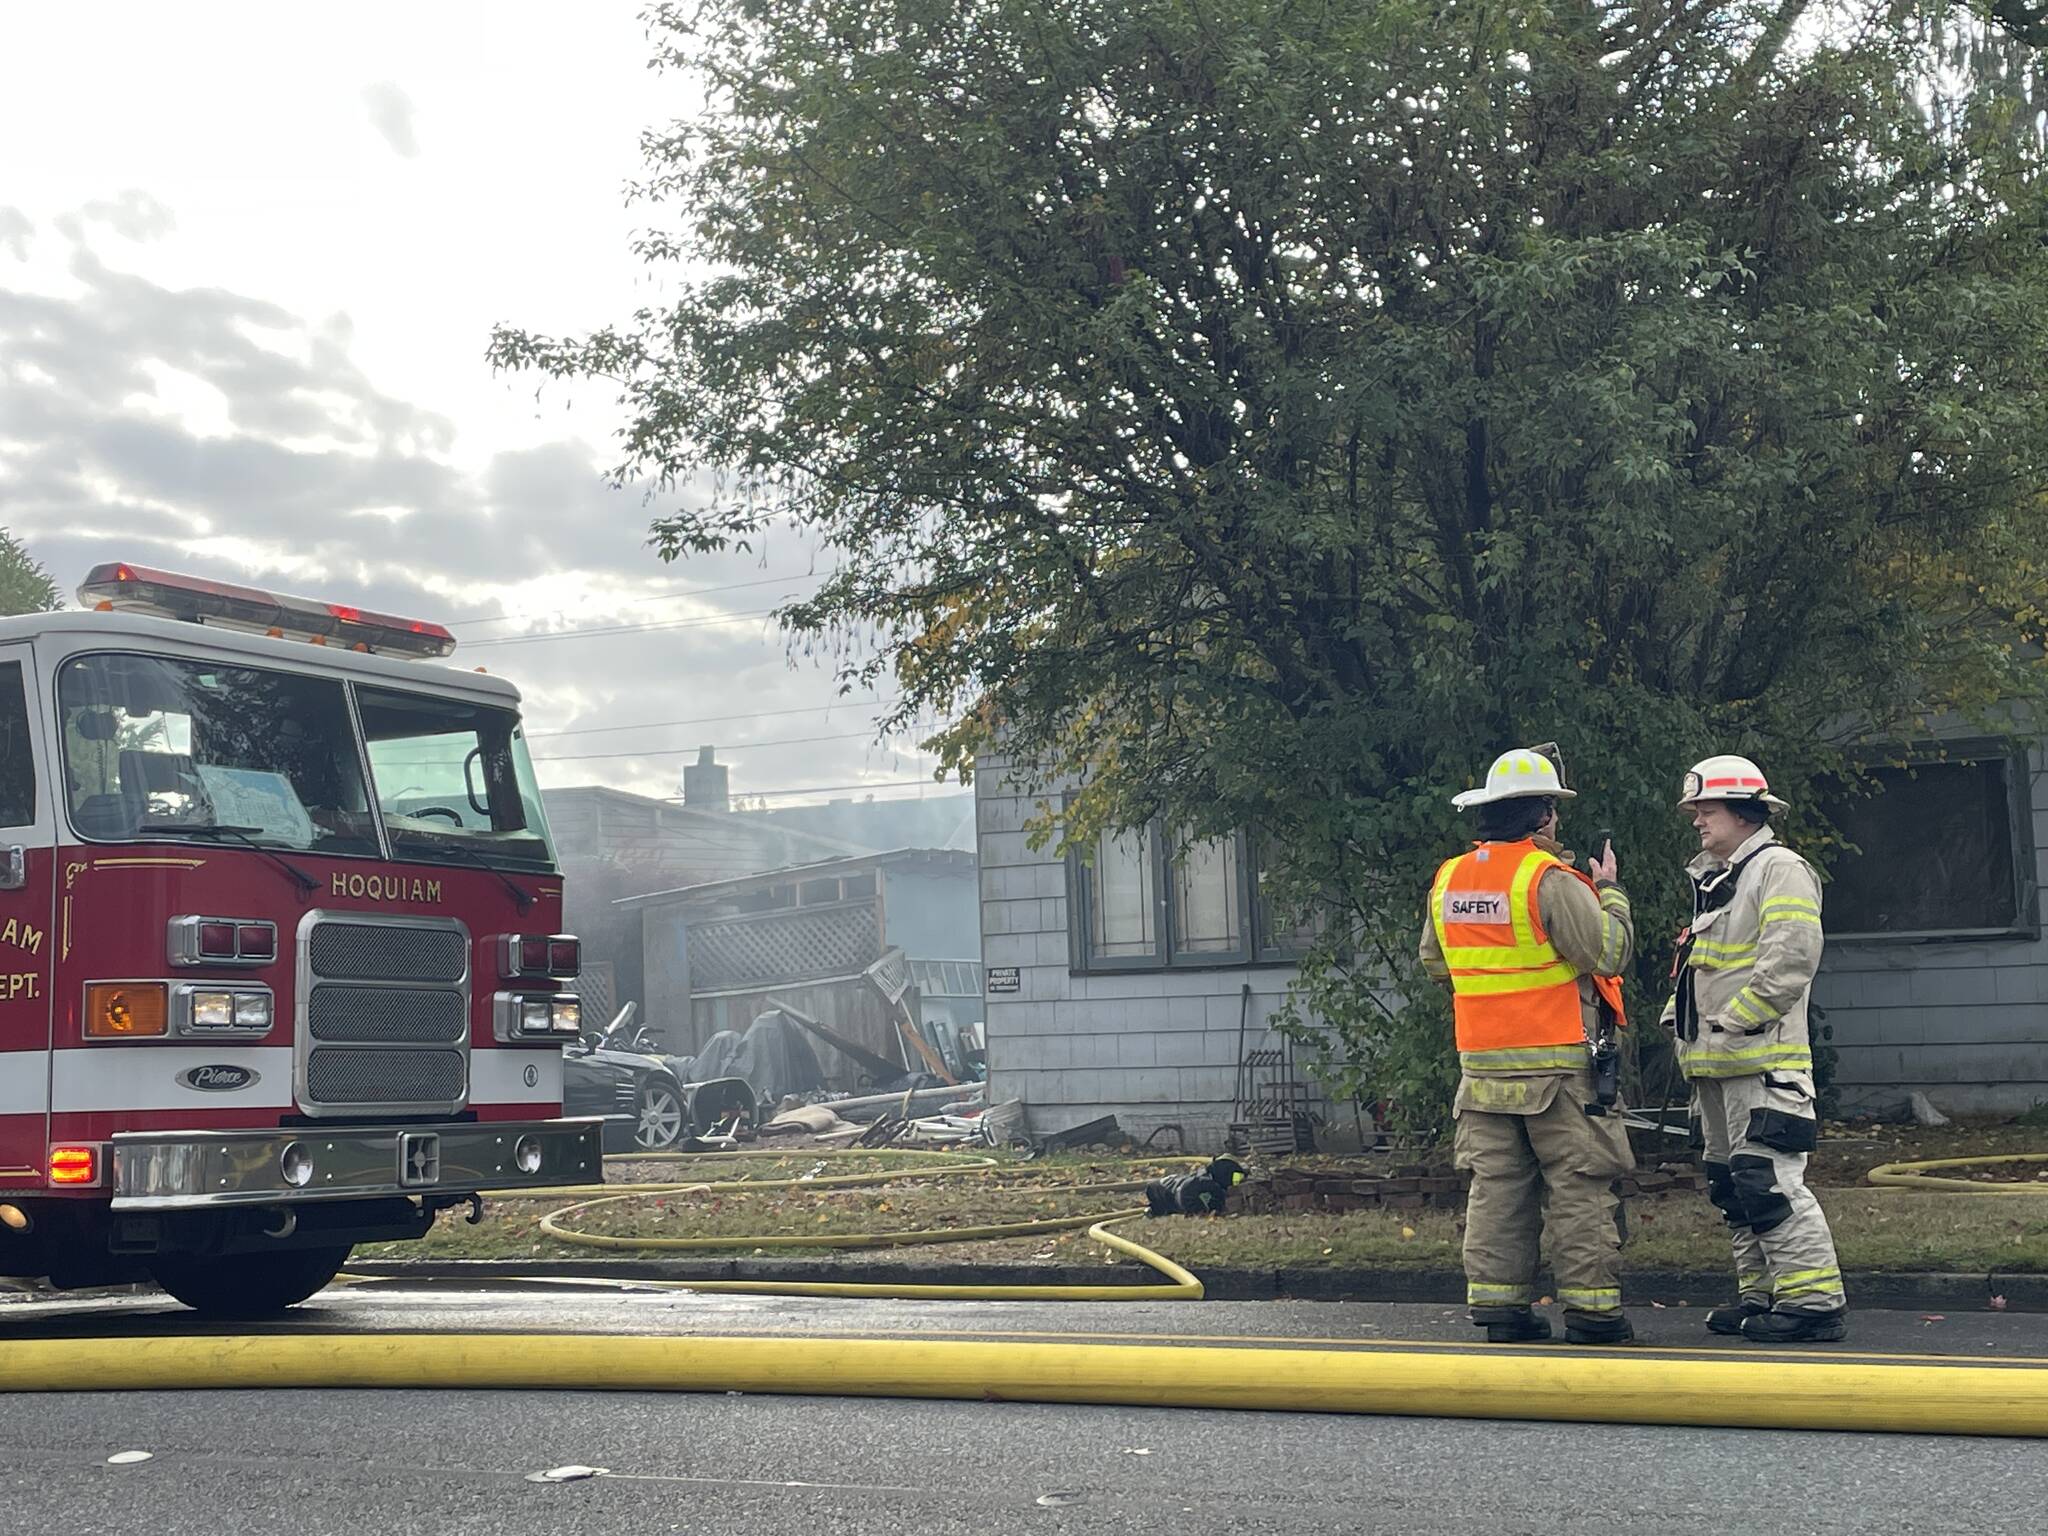 Firefighters confer during the tail end of a response to a fire in Hoquiam on Thursday. (Michael S. Lockett / The Daily World)